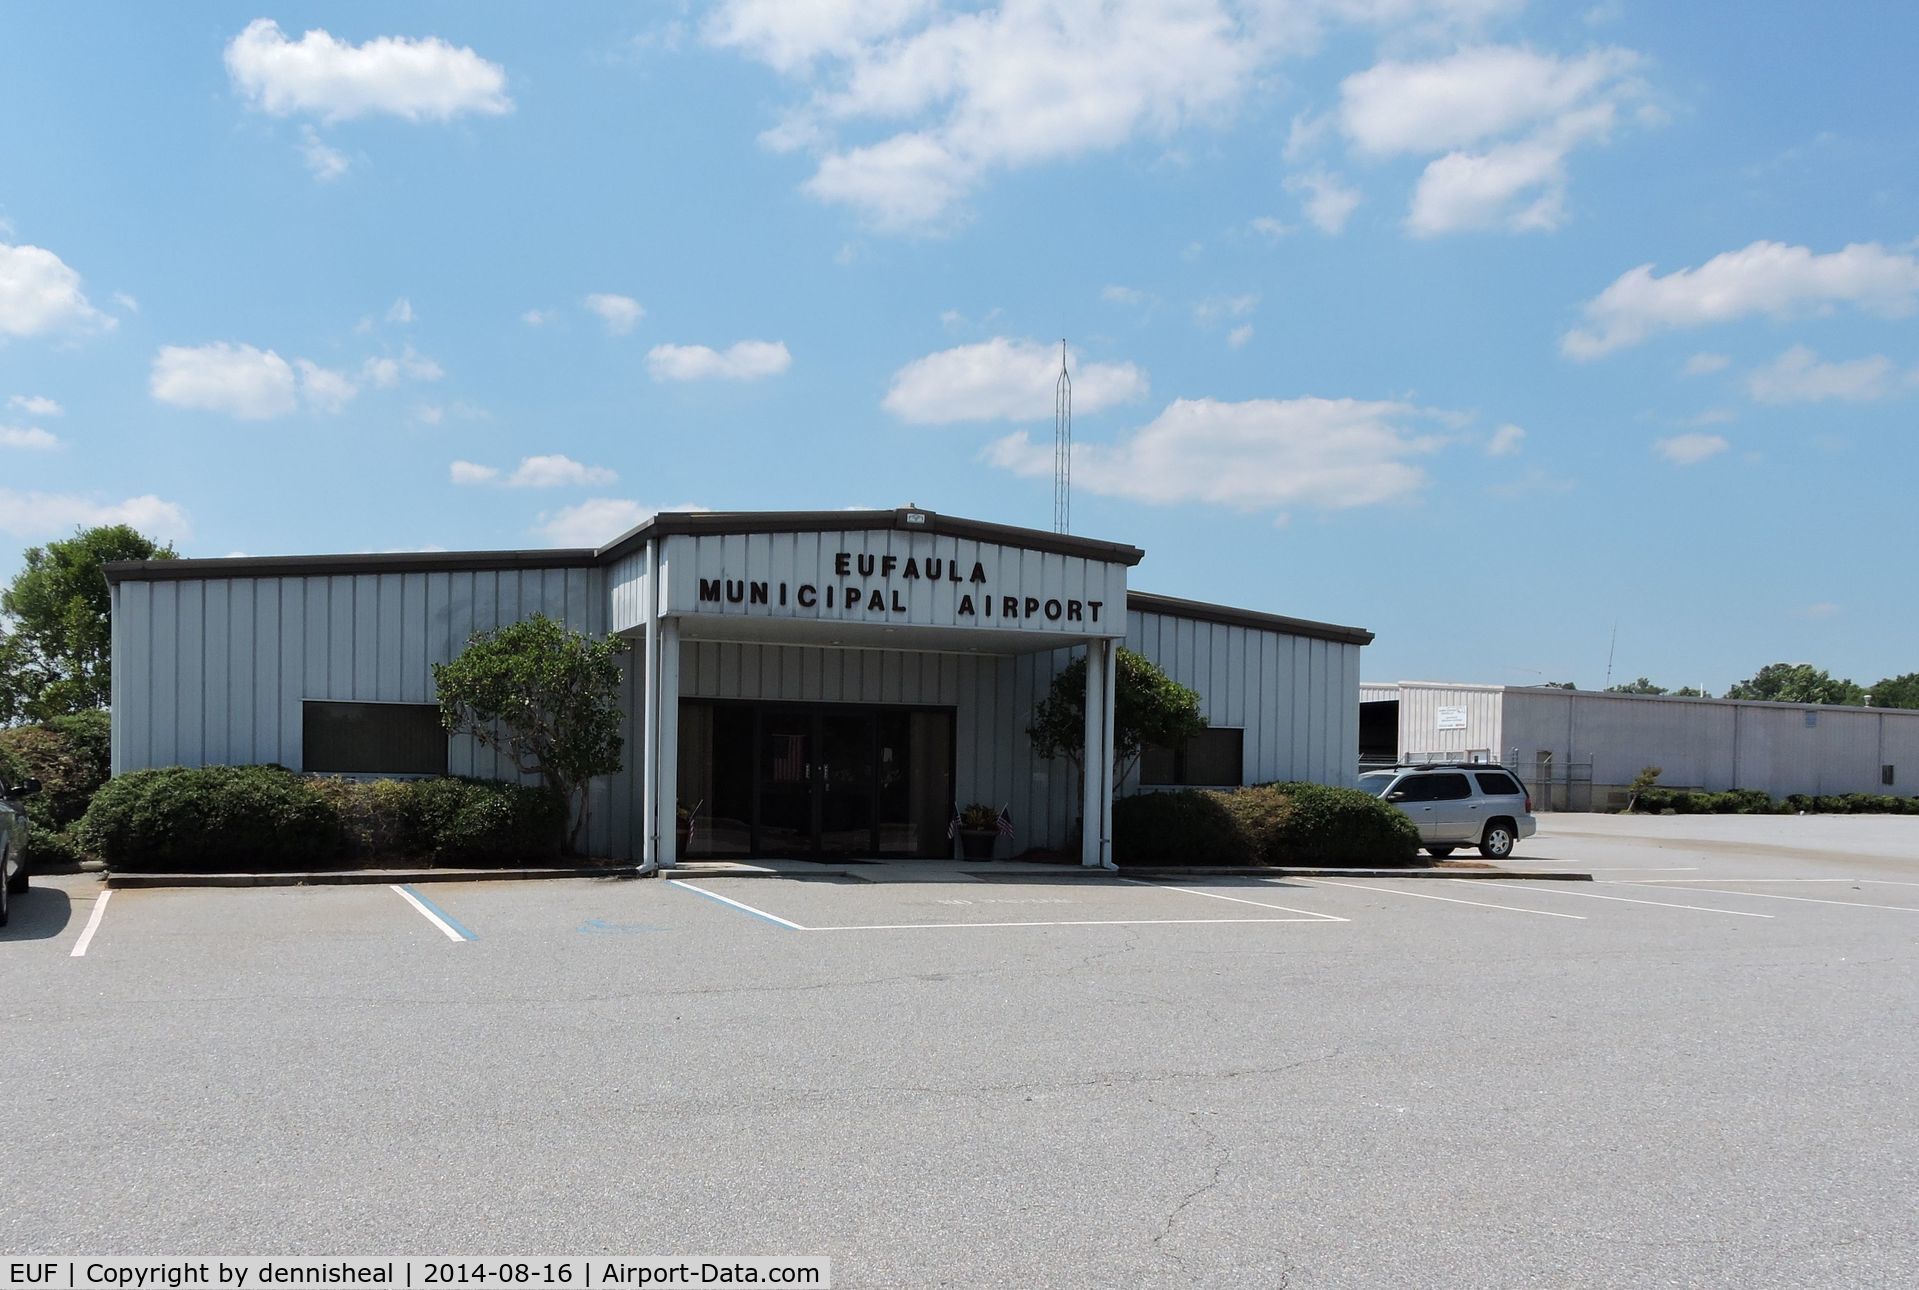 Weedon Field Airport (EUF) - AIRPORT OFFICE AT EUFAULA MUNICIPAL AIRPORT